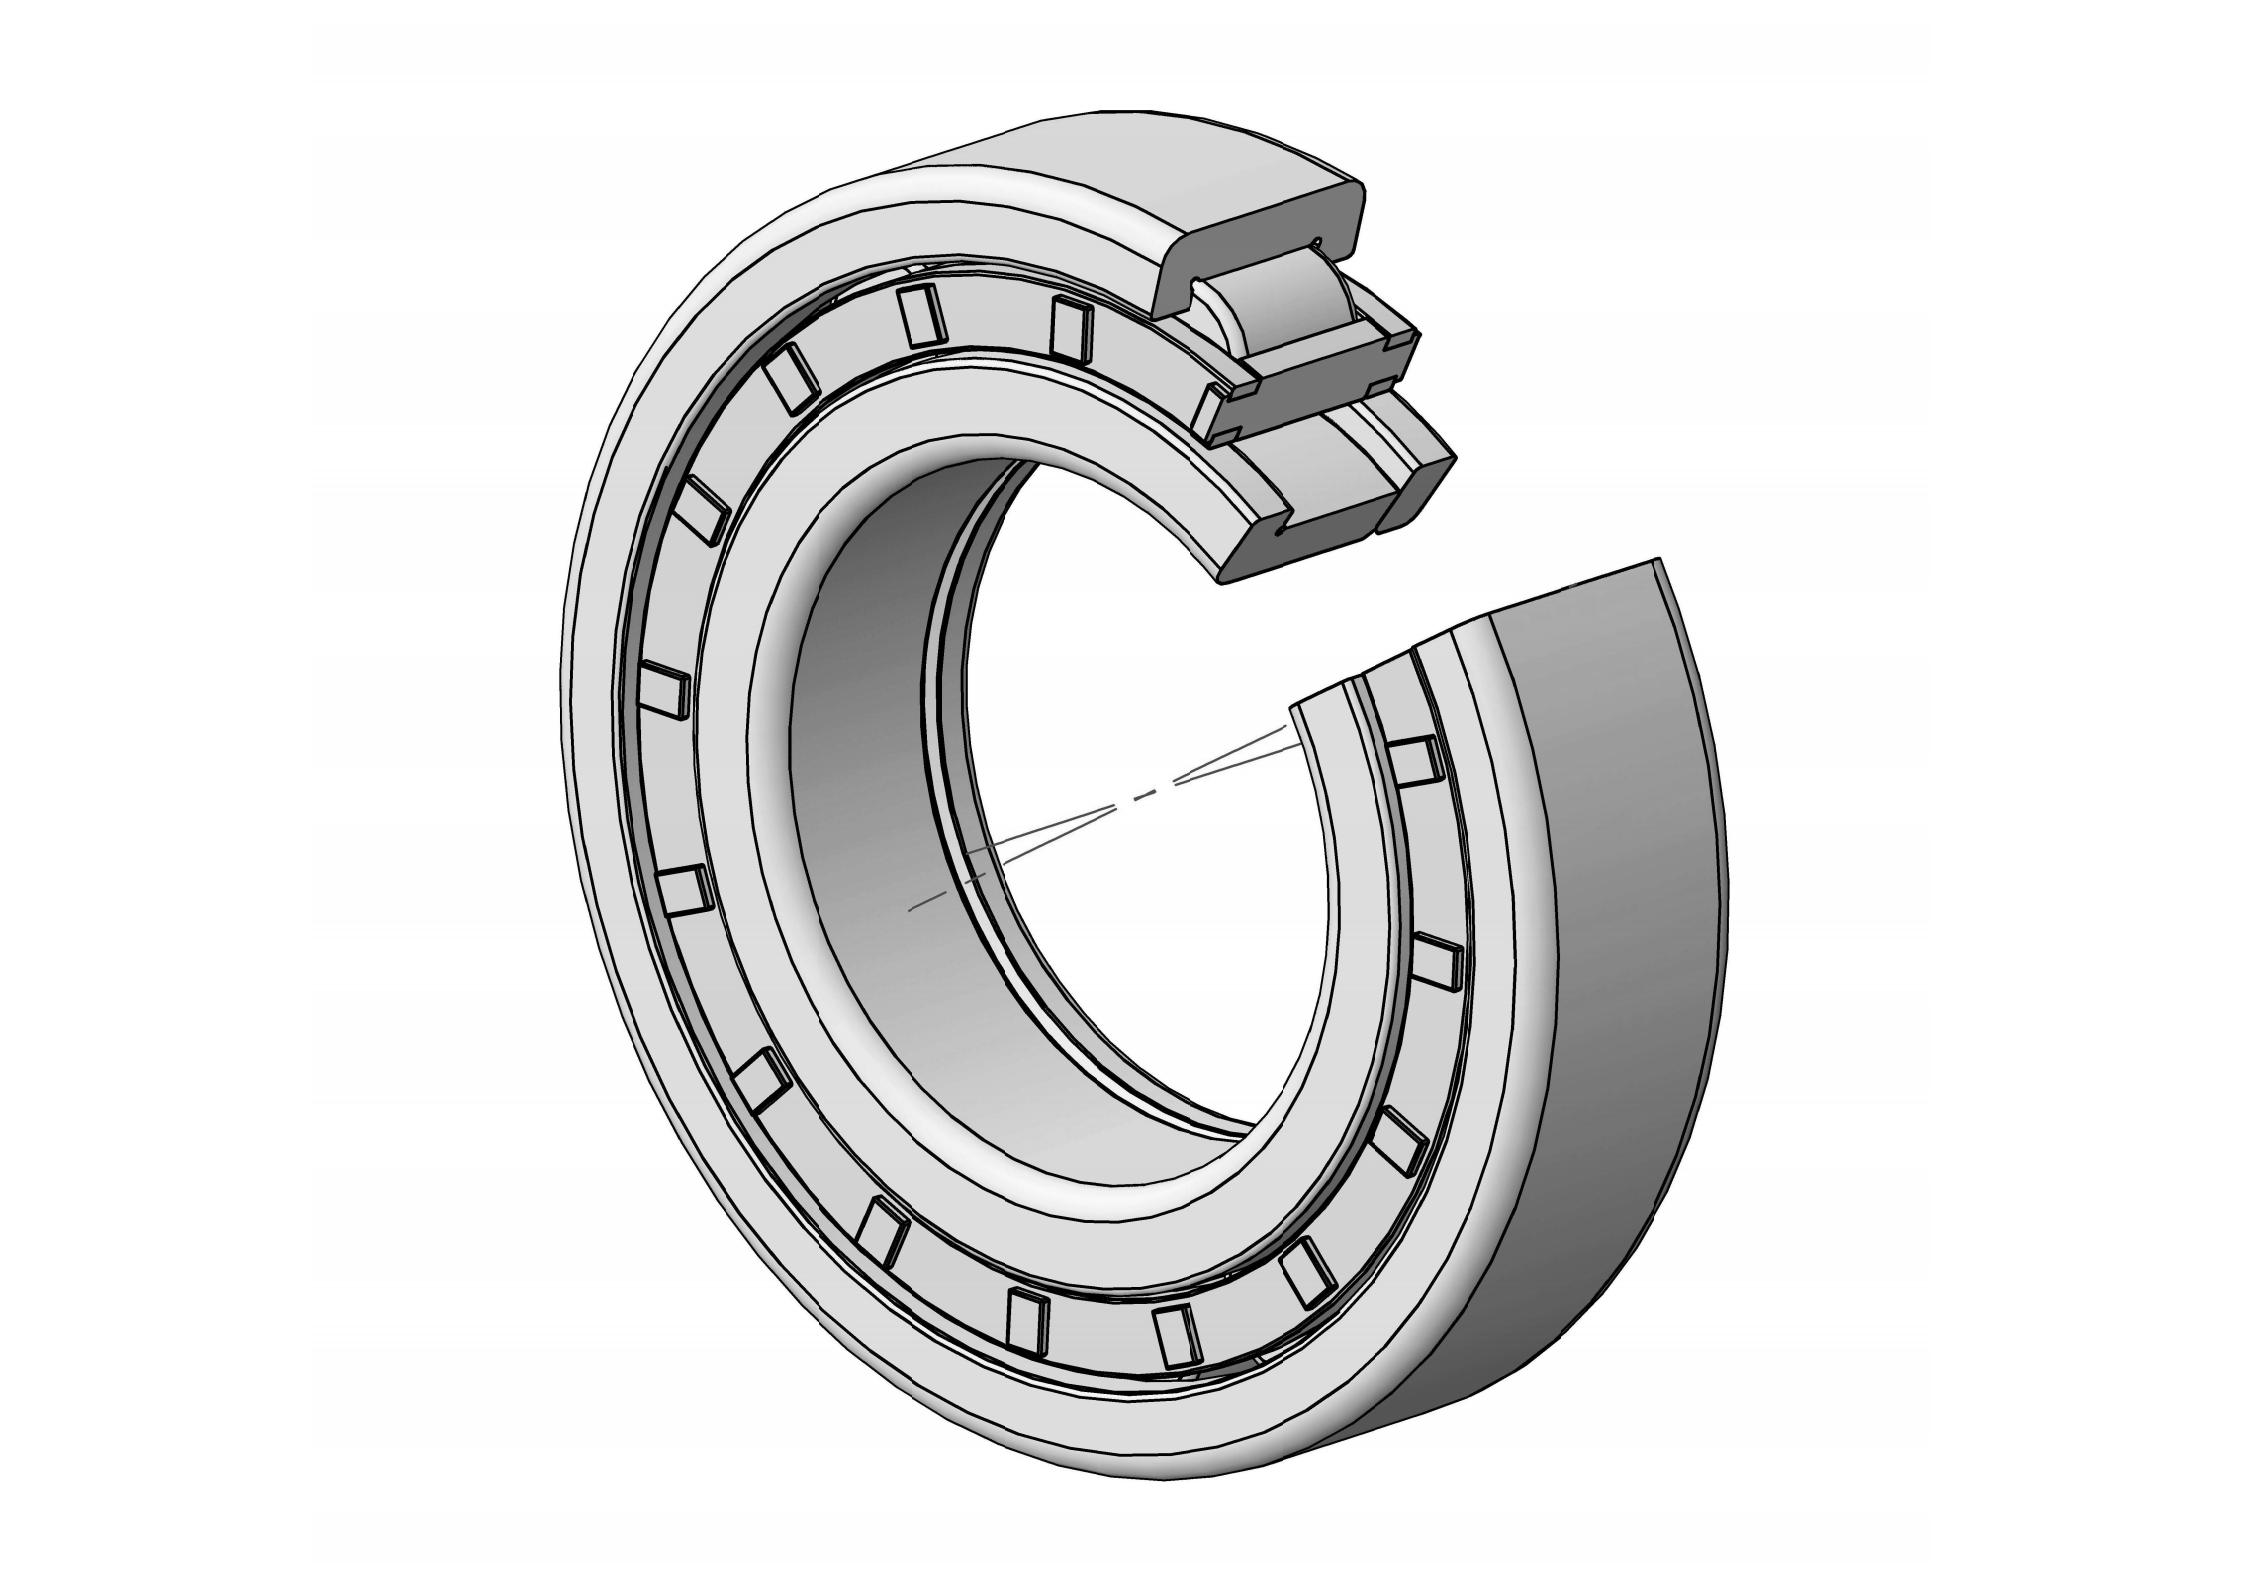 NUP310-E Single Row Cylindrical roller bearing 